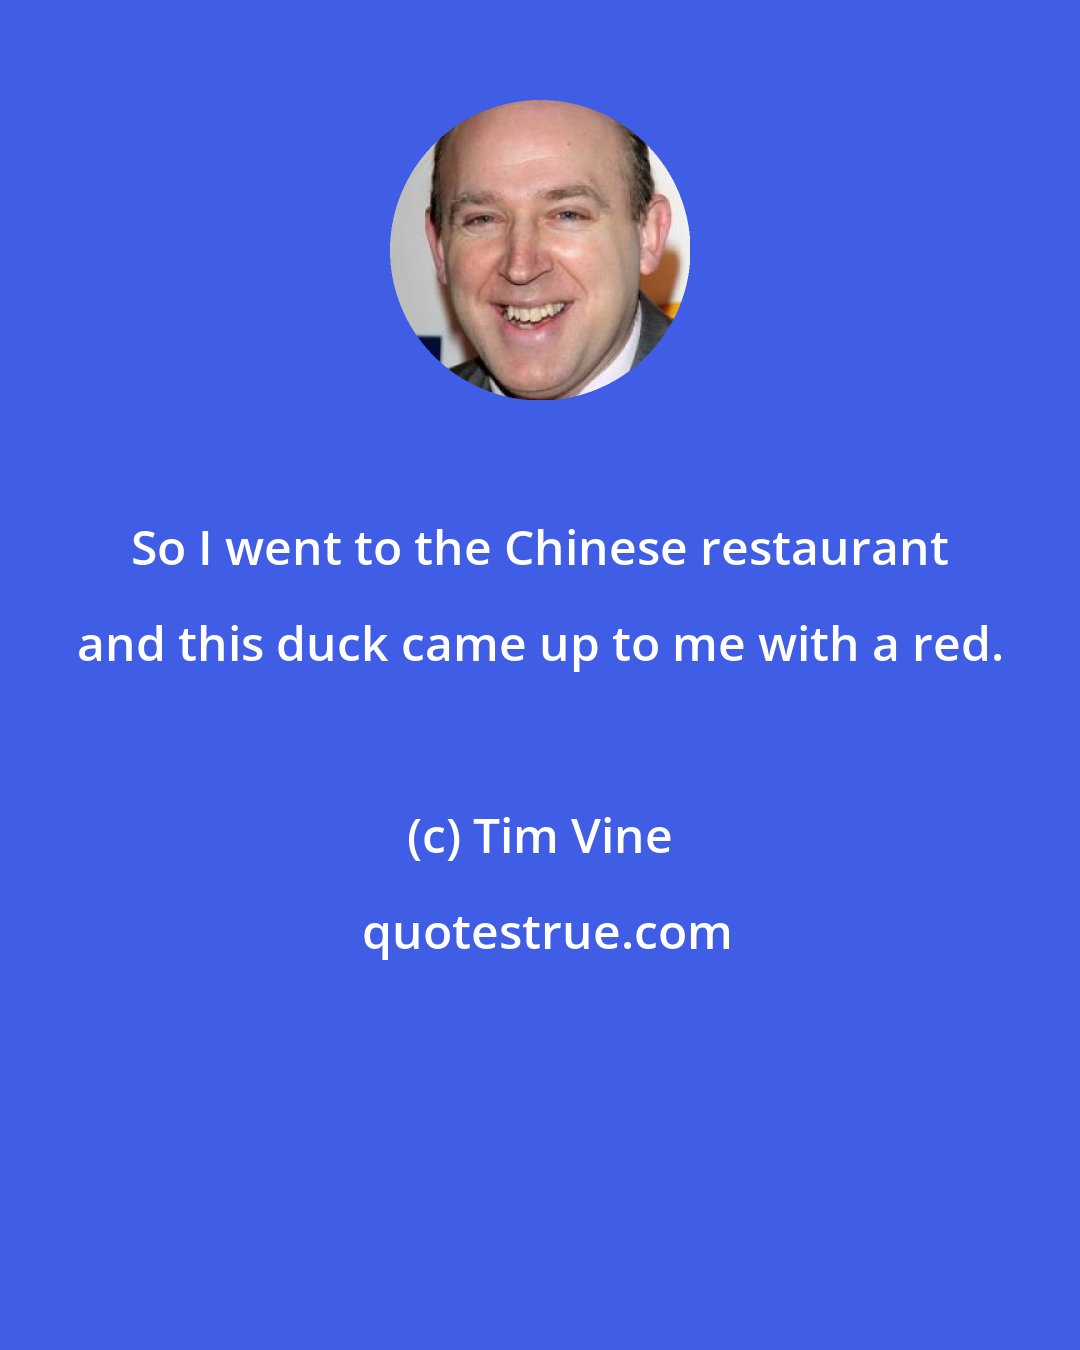 Tim Vine: So I went to the Chinese restaurant and this duck came up to me with a red.